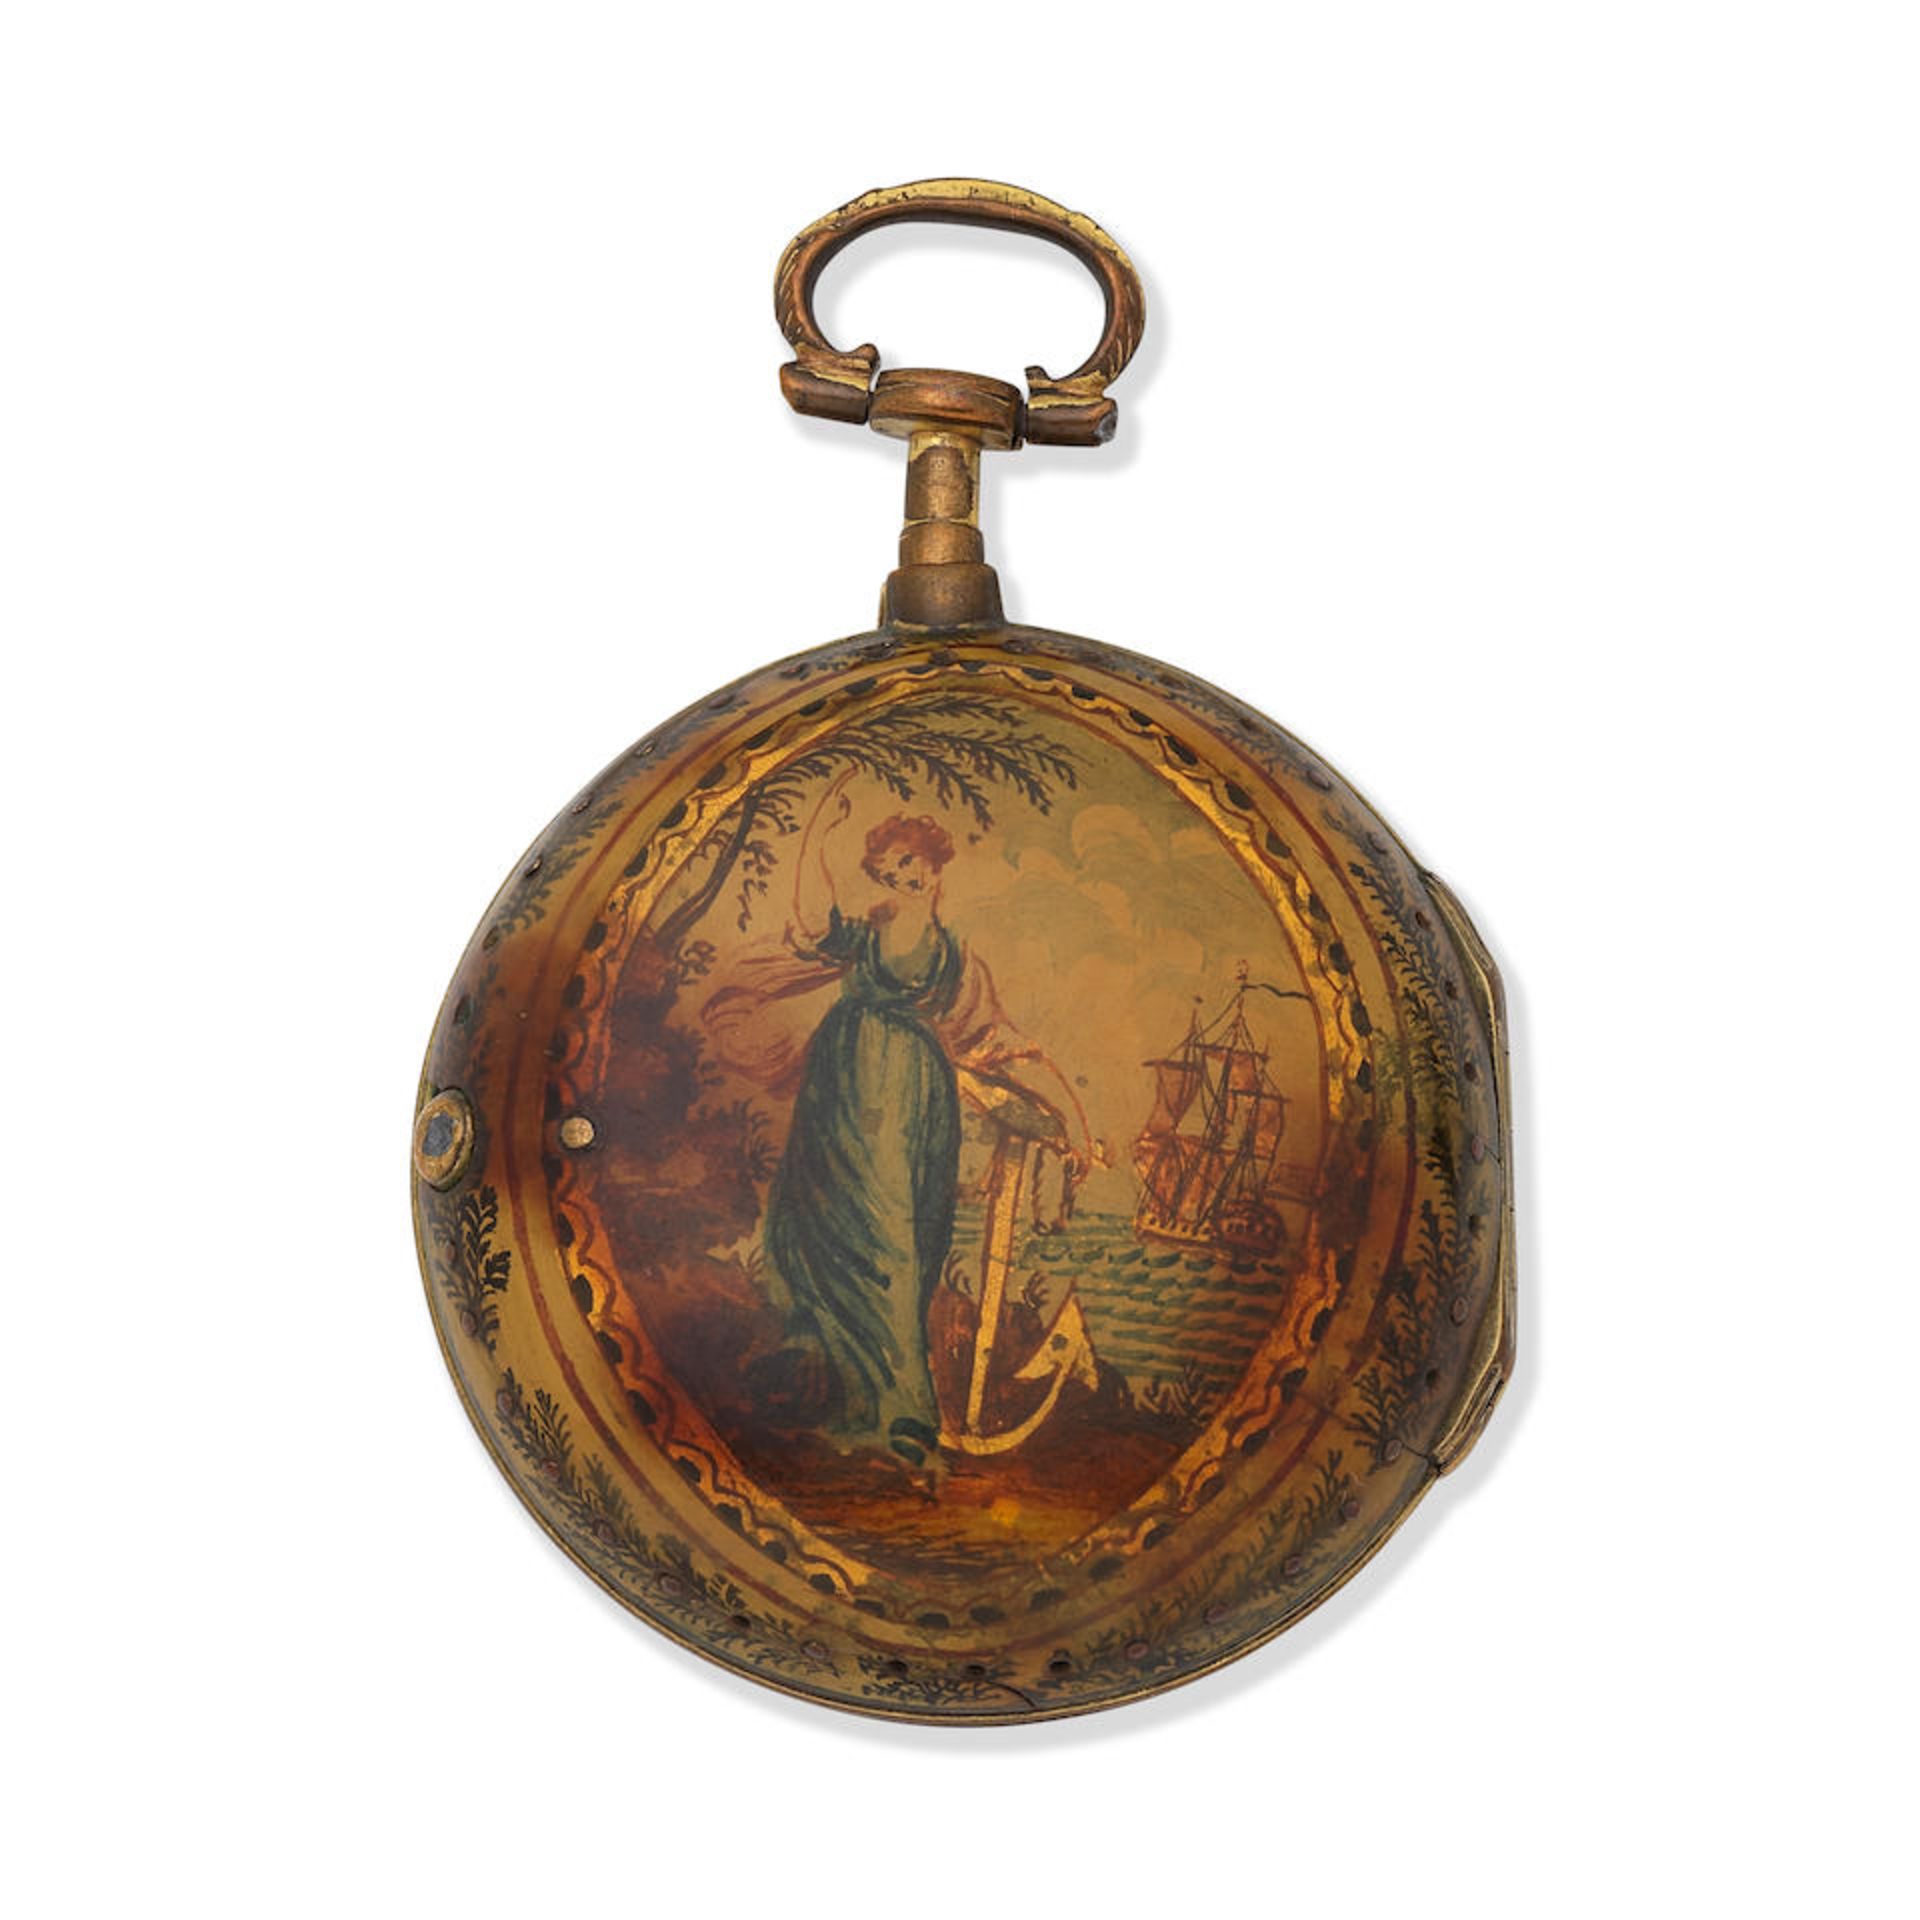 Eastland, London. A gilt metal and under-painted horn pair case pocket watch Circa 1750